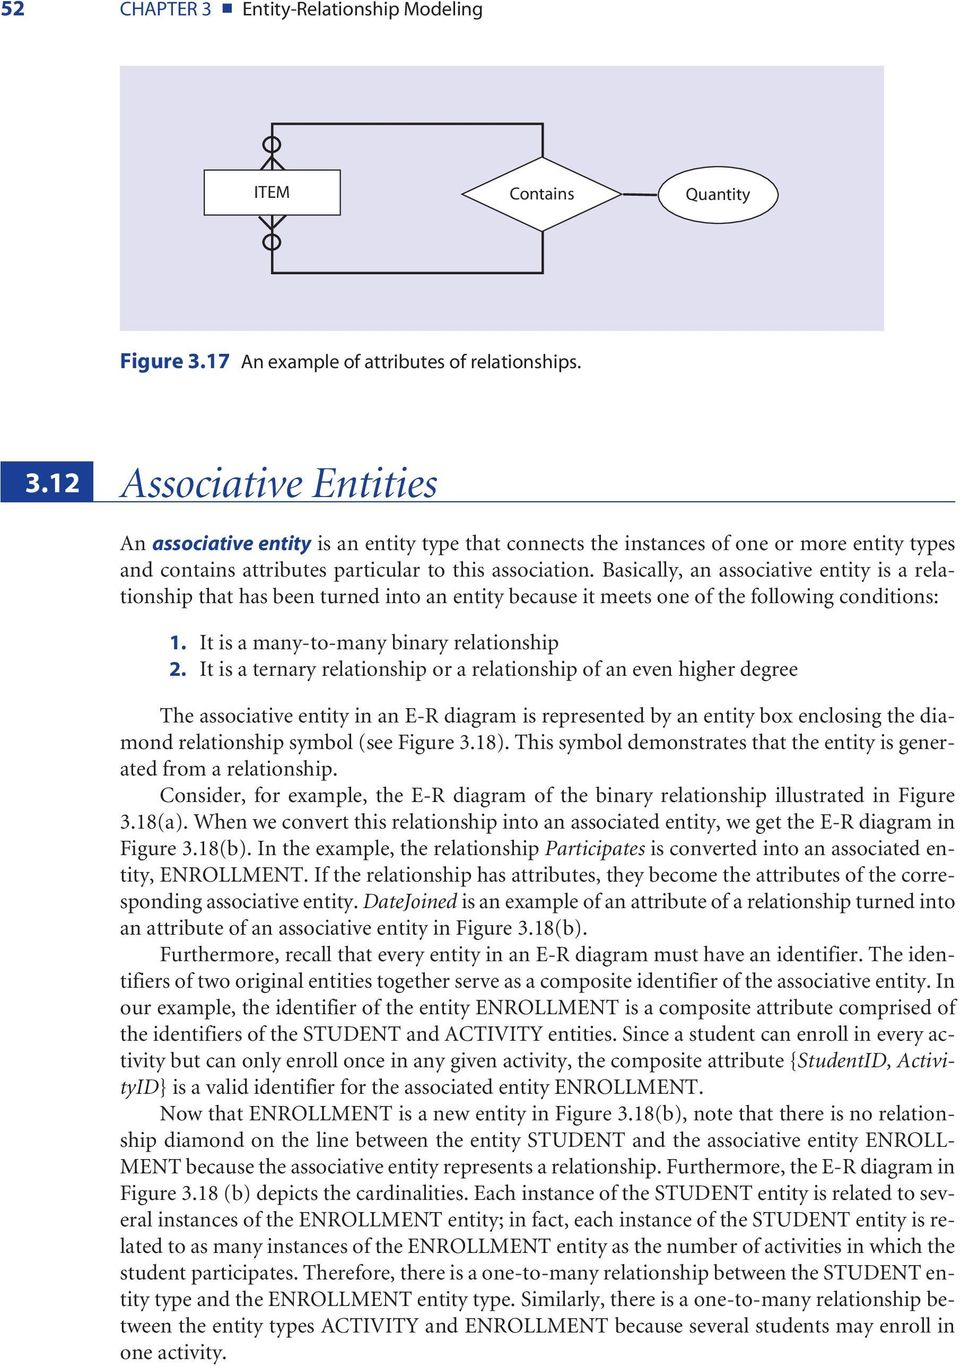 Three Entity-Relationship Modeling Chapter Overview Chapter with regard to Er Diagram Relationship Between 3 Entities